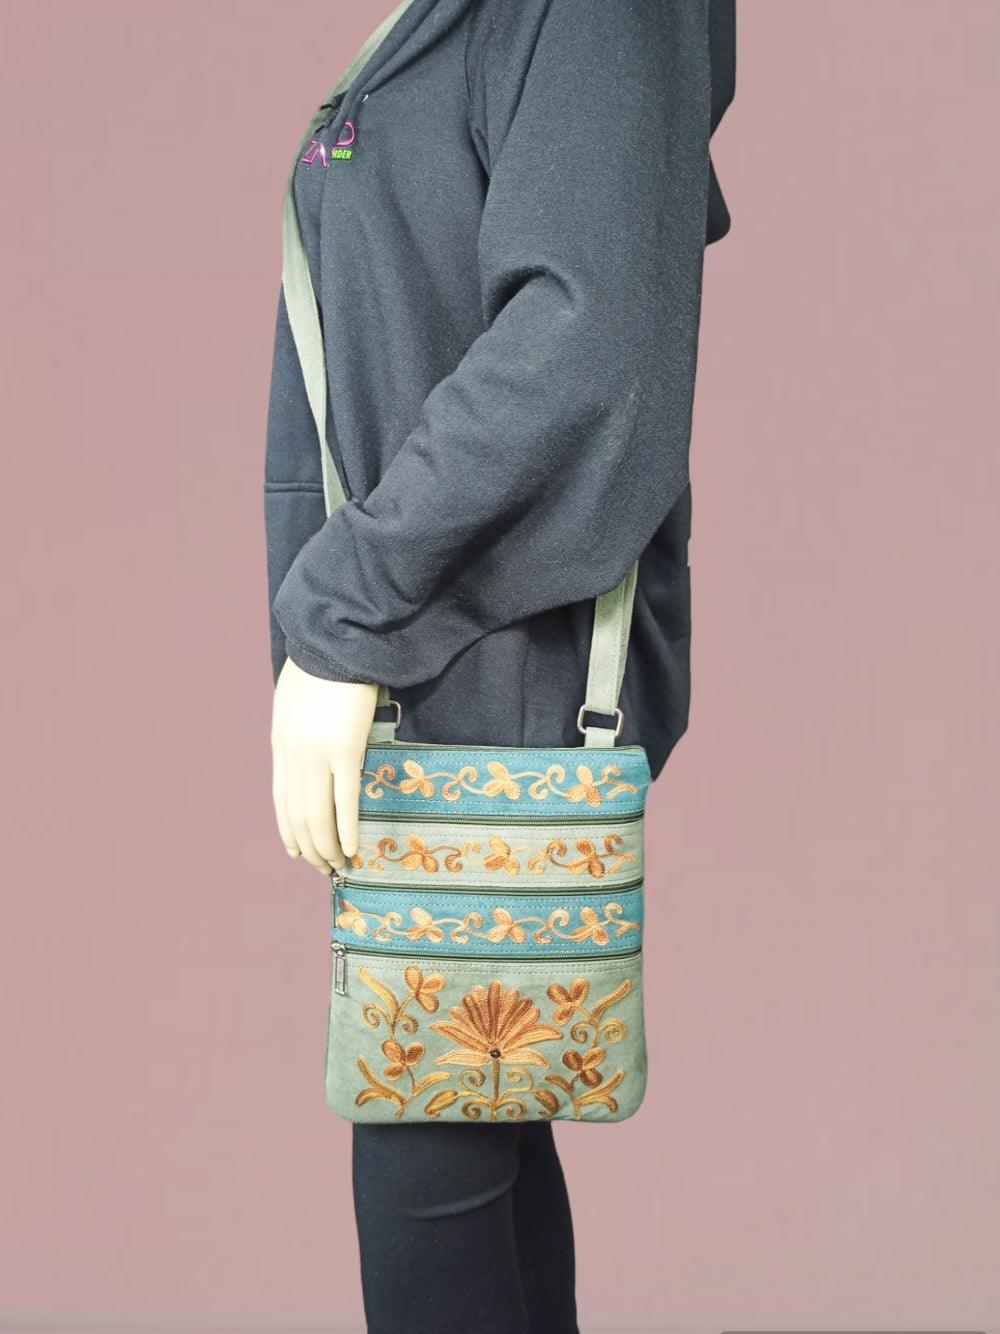 Suede Leather Sling Bag | Embroidery 5 Zipper | Sling Bag For Girls